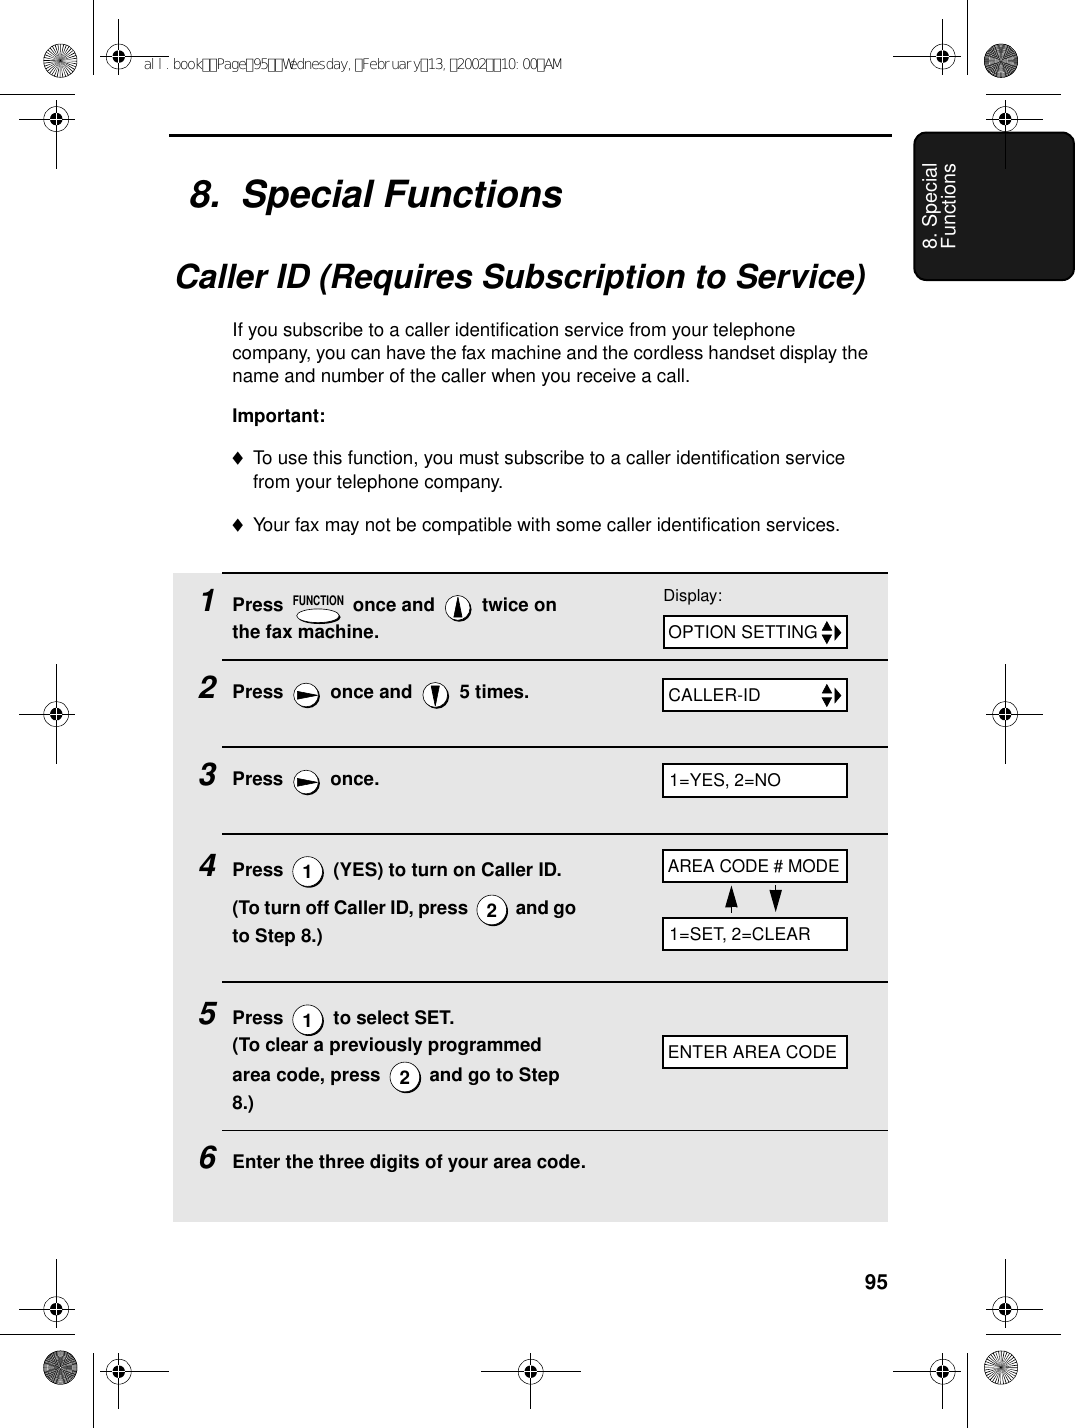 958. Special Functions8.  Special FunctionsCaller ID (Requires Subscription to Service)If you subscribe to a caller identification service from your telephone company, you can have the fax machine and the cordless handset display the name and number of the caller when you receive a call.Important:♦To use this function, you must subscribe to a caller identification service from your telephone company.♦Your fax may not be compatible with some caller identification services.1Press   once and   twice on the fax machine.2Press   once and   5 times.3Press  once.4Press   (YES) to turn on Caller ID.(To turn off Caller ID, press   and go to Step 8.)5Press   to select SET. (To clear a previously programmed area code, press   and go to Step 8.)6Enter the three digits of your area code.FUNCTION1212Display:OPTION SETTINGCALLER-IDAREA CODE # MODEENTER AREA CODE1=YES, 2=NO1=SET, 2=CLEARall.bookPage95Wednesday,February13,200210:00AM